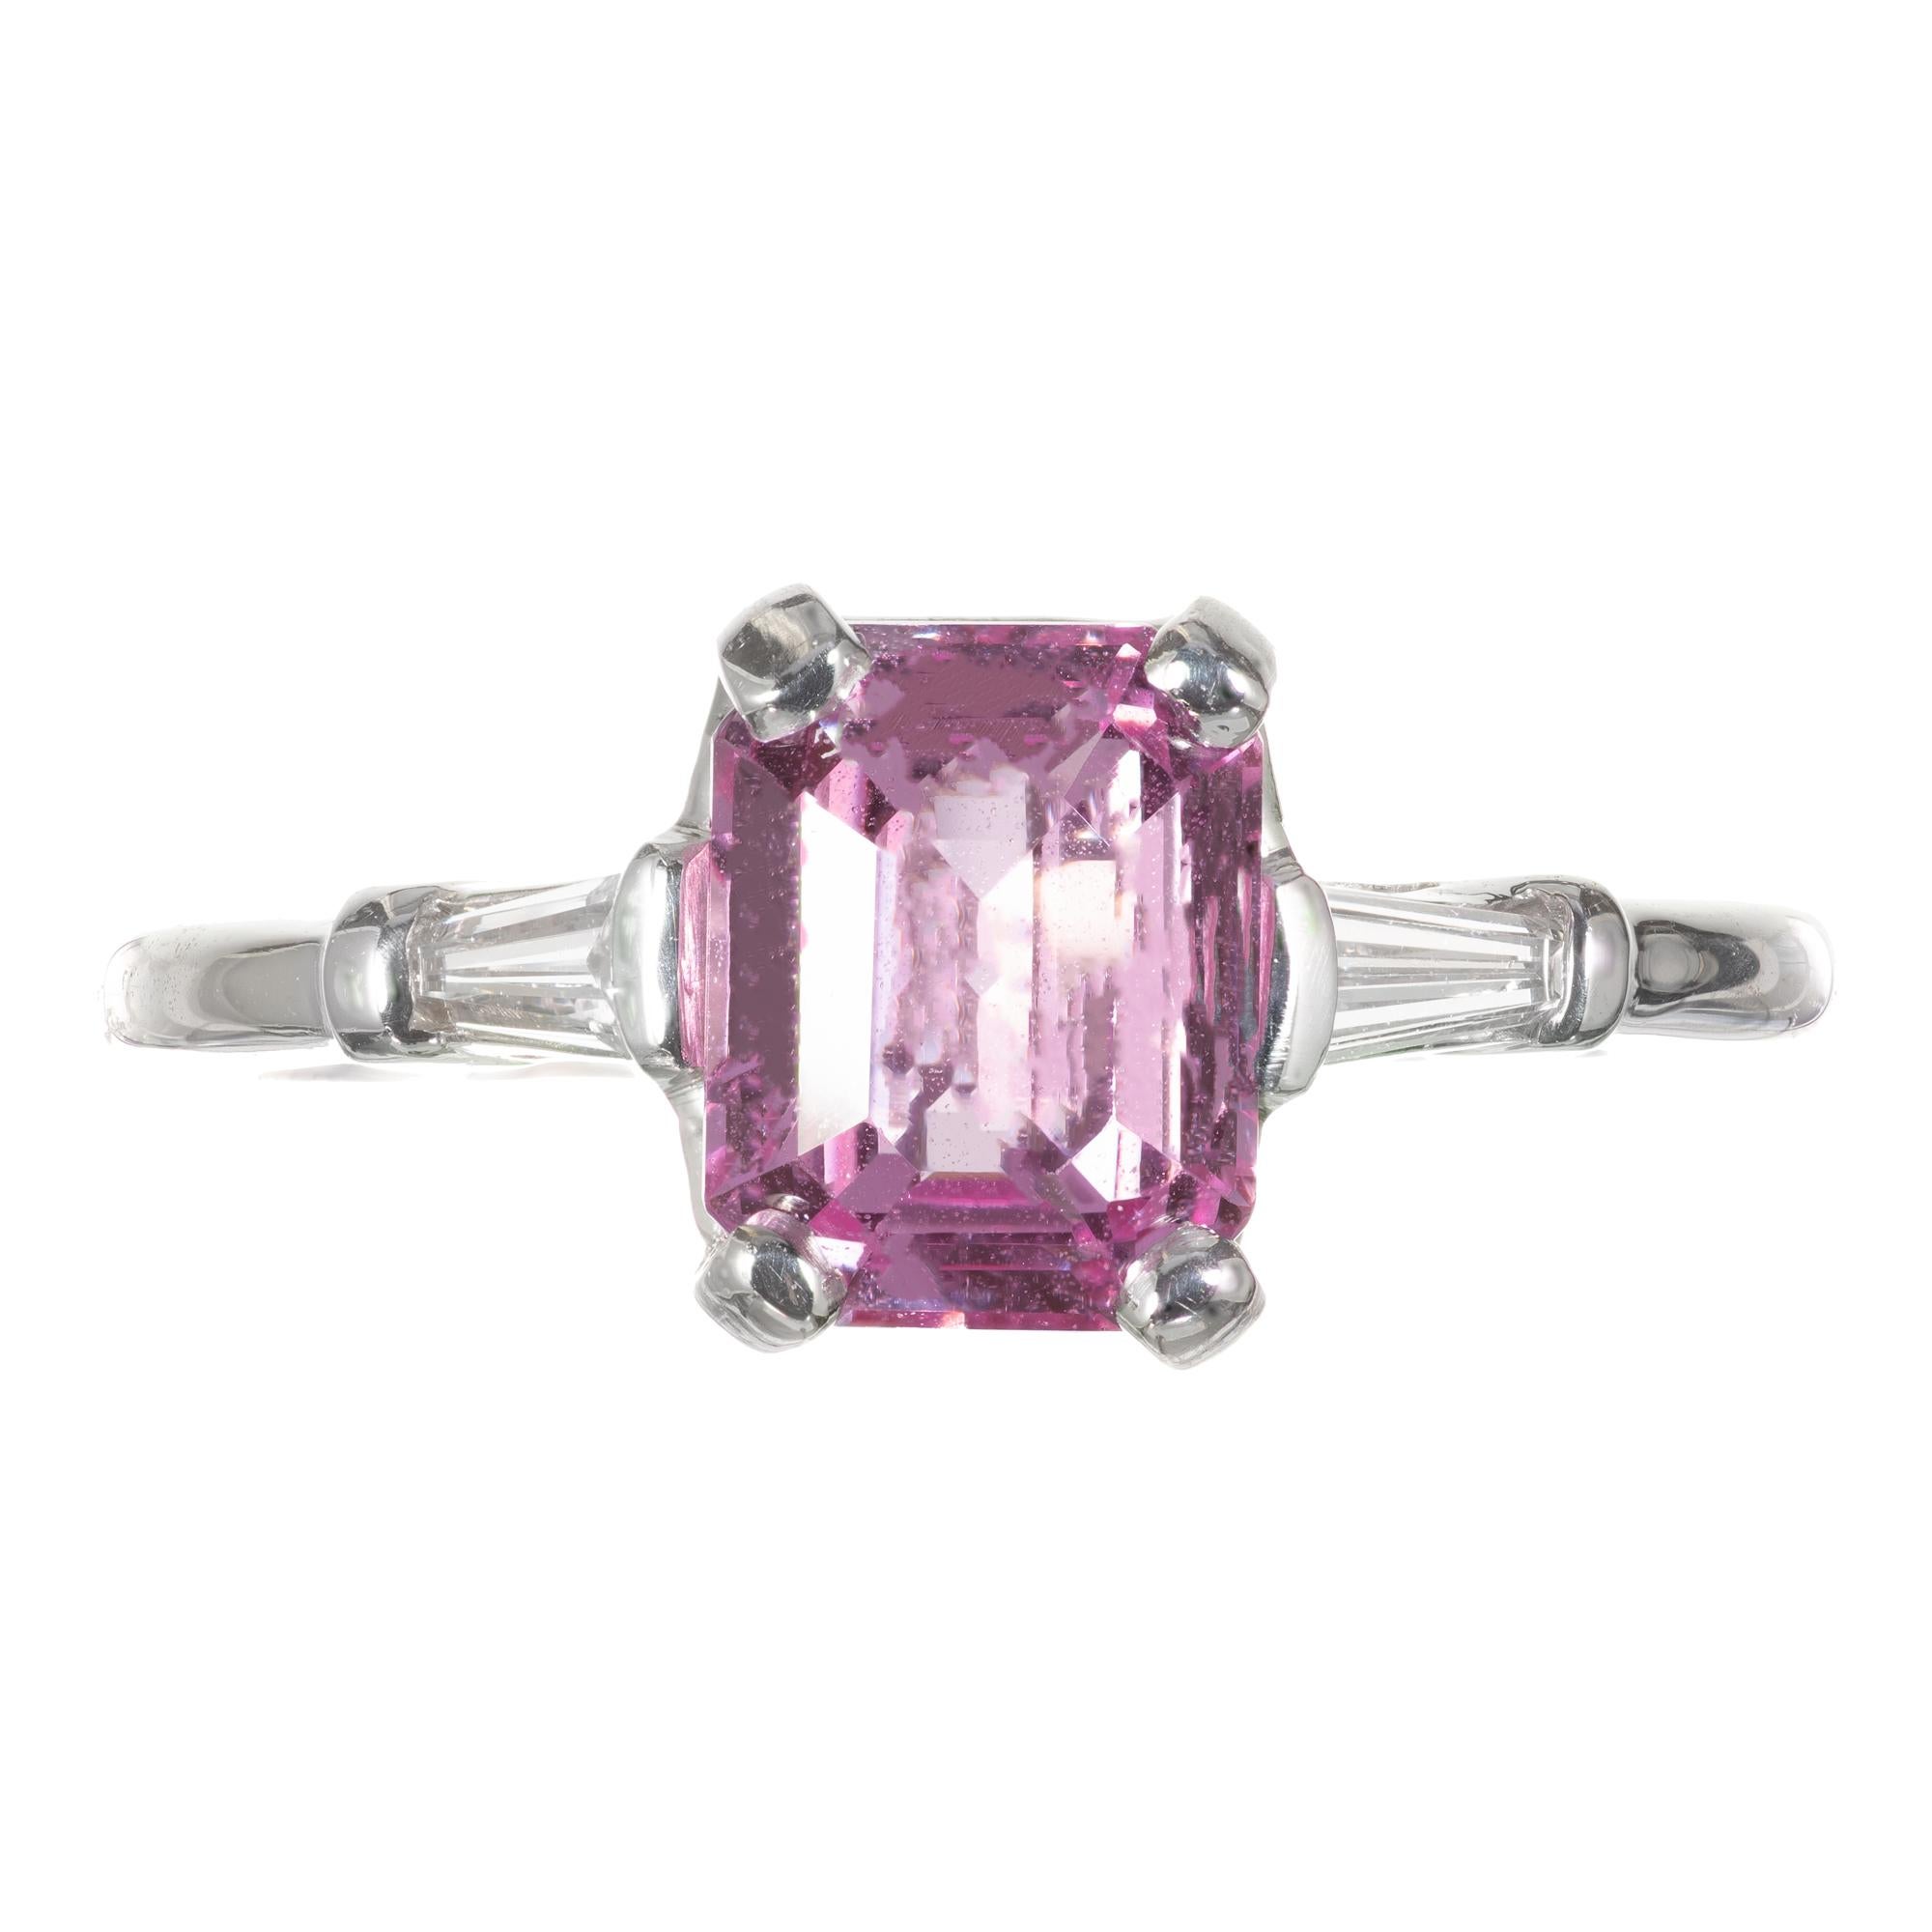 Vintage 1940's sapphire and diamond engagement ring. Pink sapphire center stone with two tapered baguette side diamonds in a platinum three-stone setting. GIA certified pink sapphire natural no heat no enhancements 

1 octagonal pink sapphire,